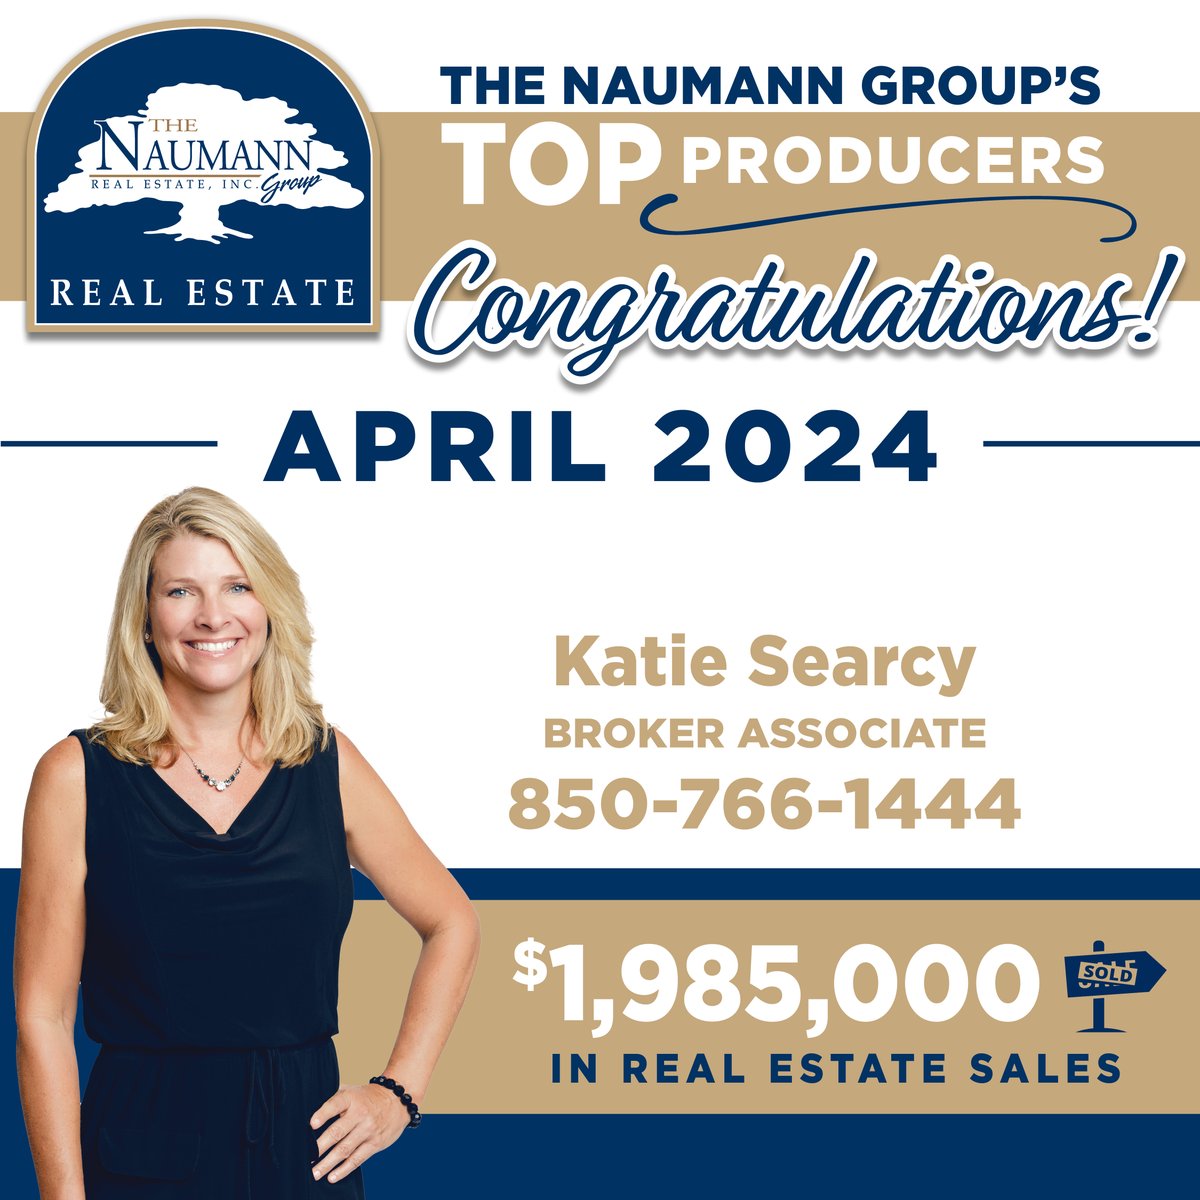 Congratulations to Katie, our Top Producer for April, with over $1.9 Million in Real Estate Sales! 👏 🥇

#TallahasseeRealEstate #TopRealtors #TopProducingAgent